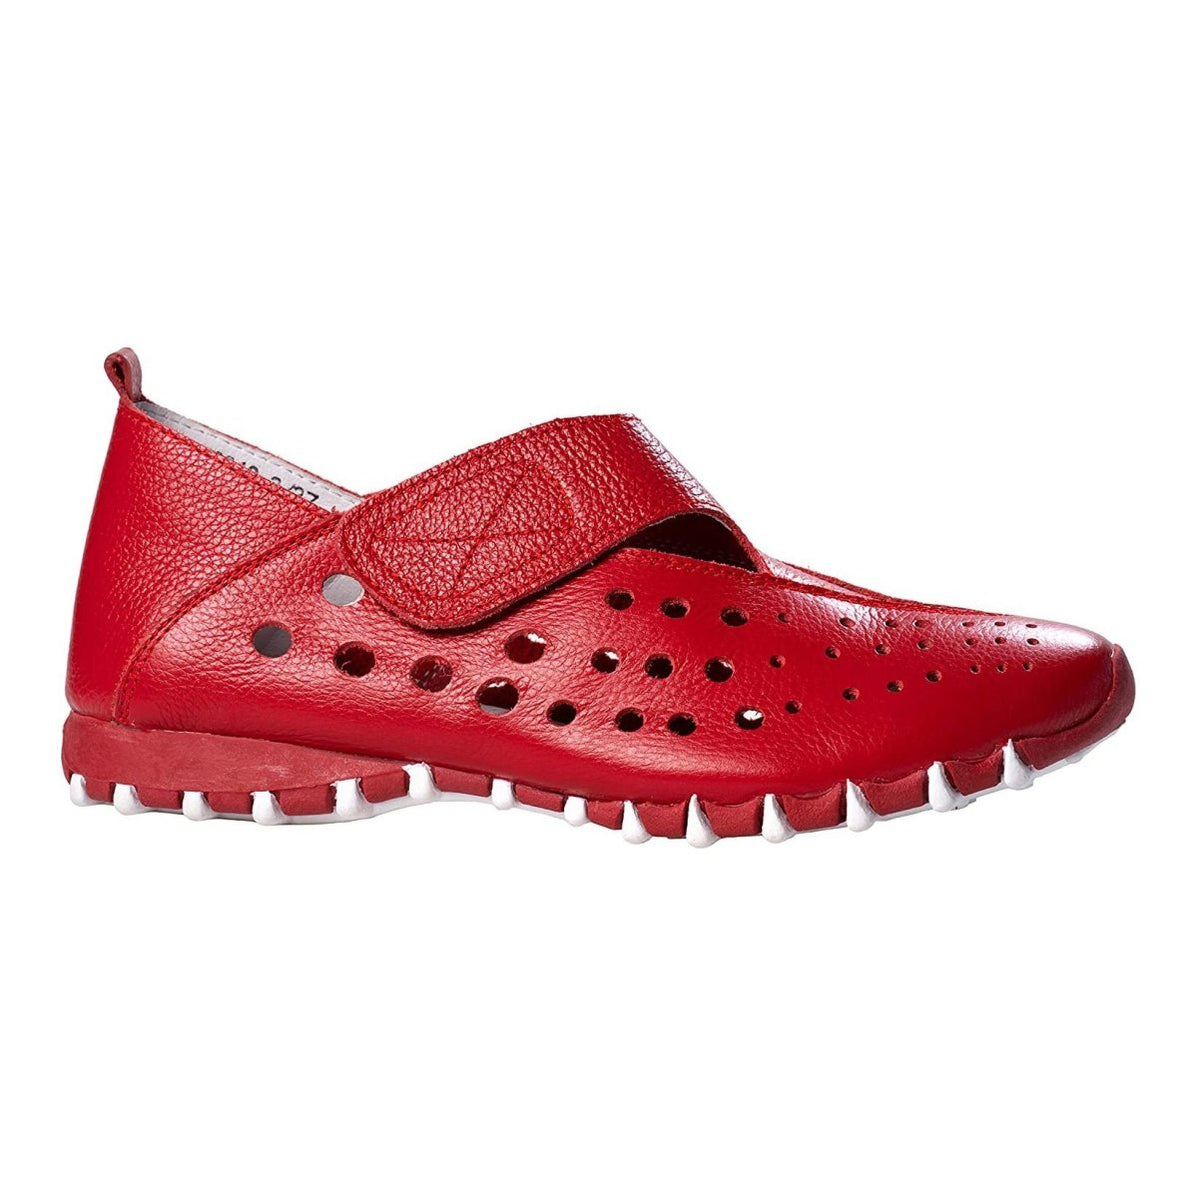 Litfoot Women's LF9010-3 Red Leather - Tip Top Shoes of New York